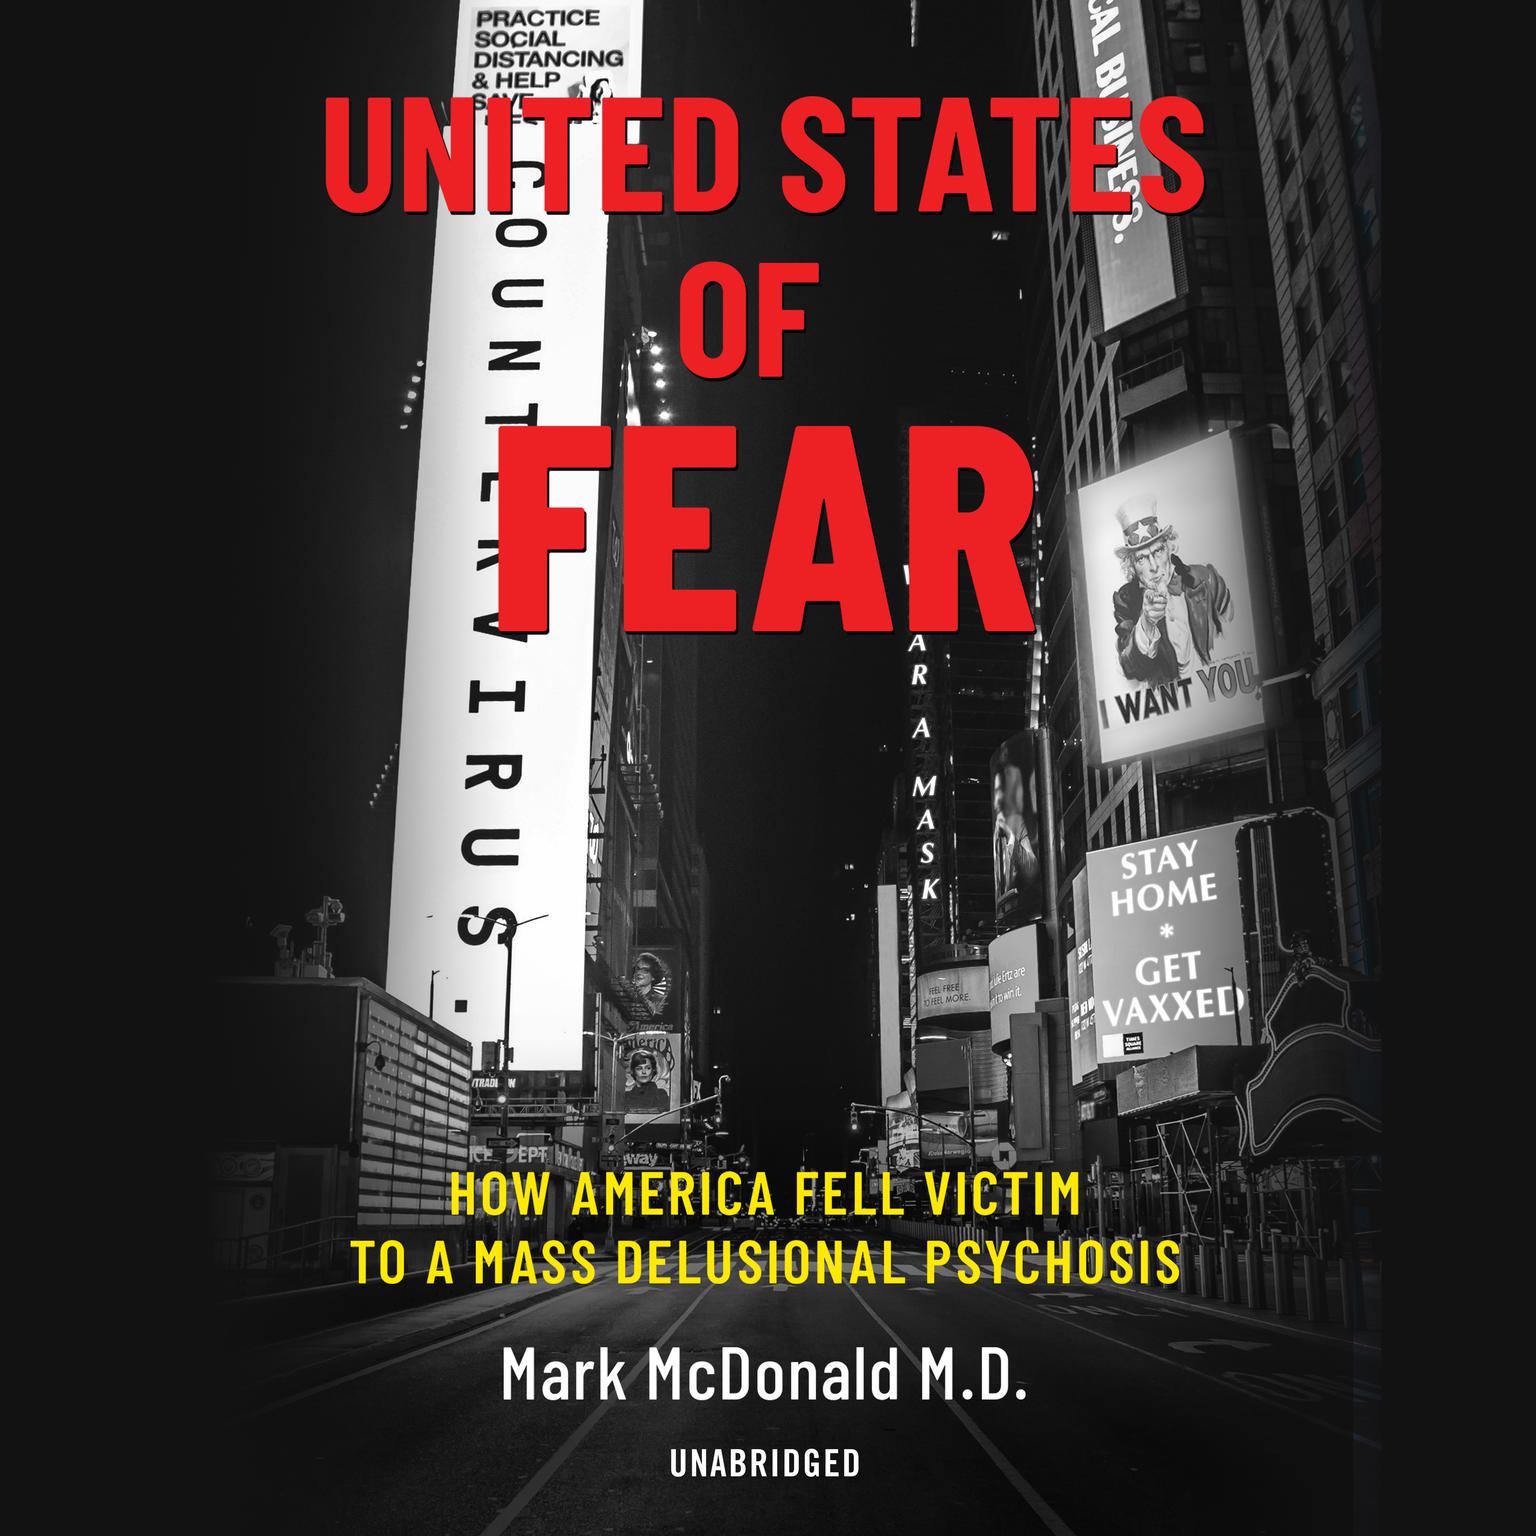 United States of Fear: How America Fell Victim to a Mass Delusional Psychosis Audiobook, by Mark McDonald